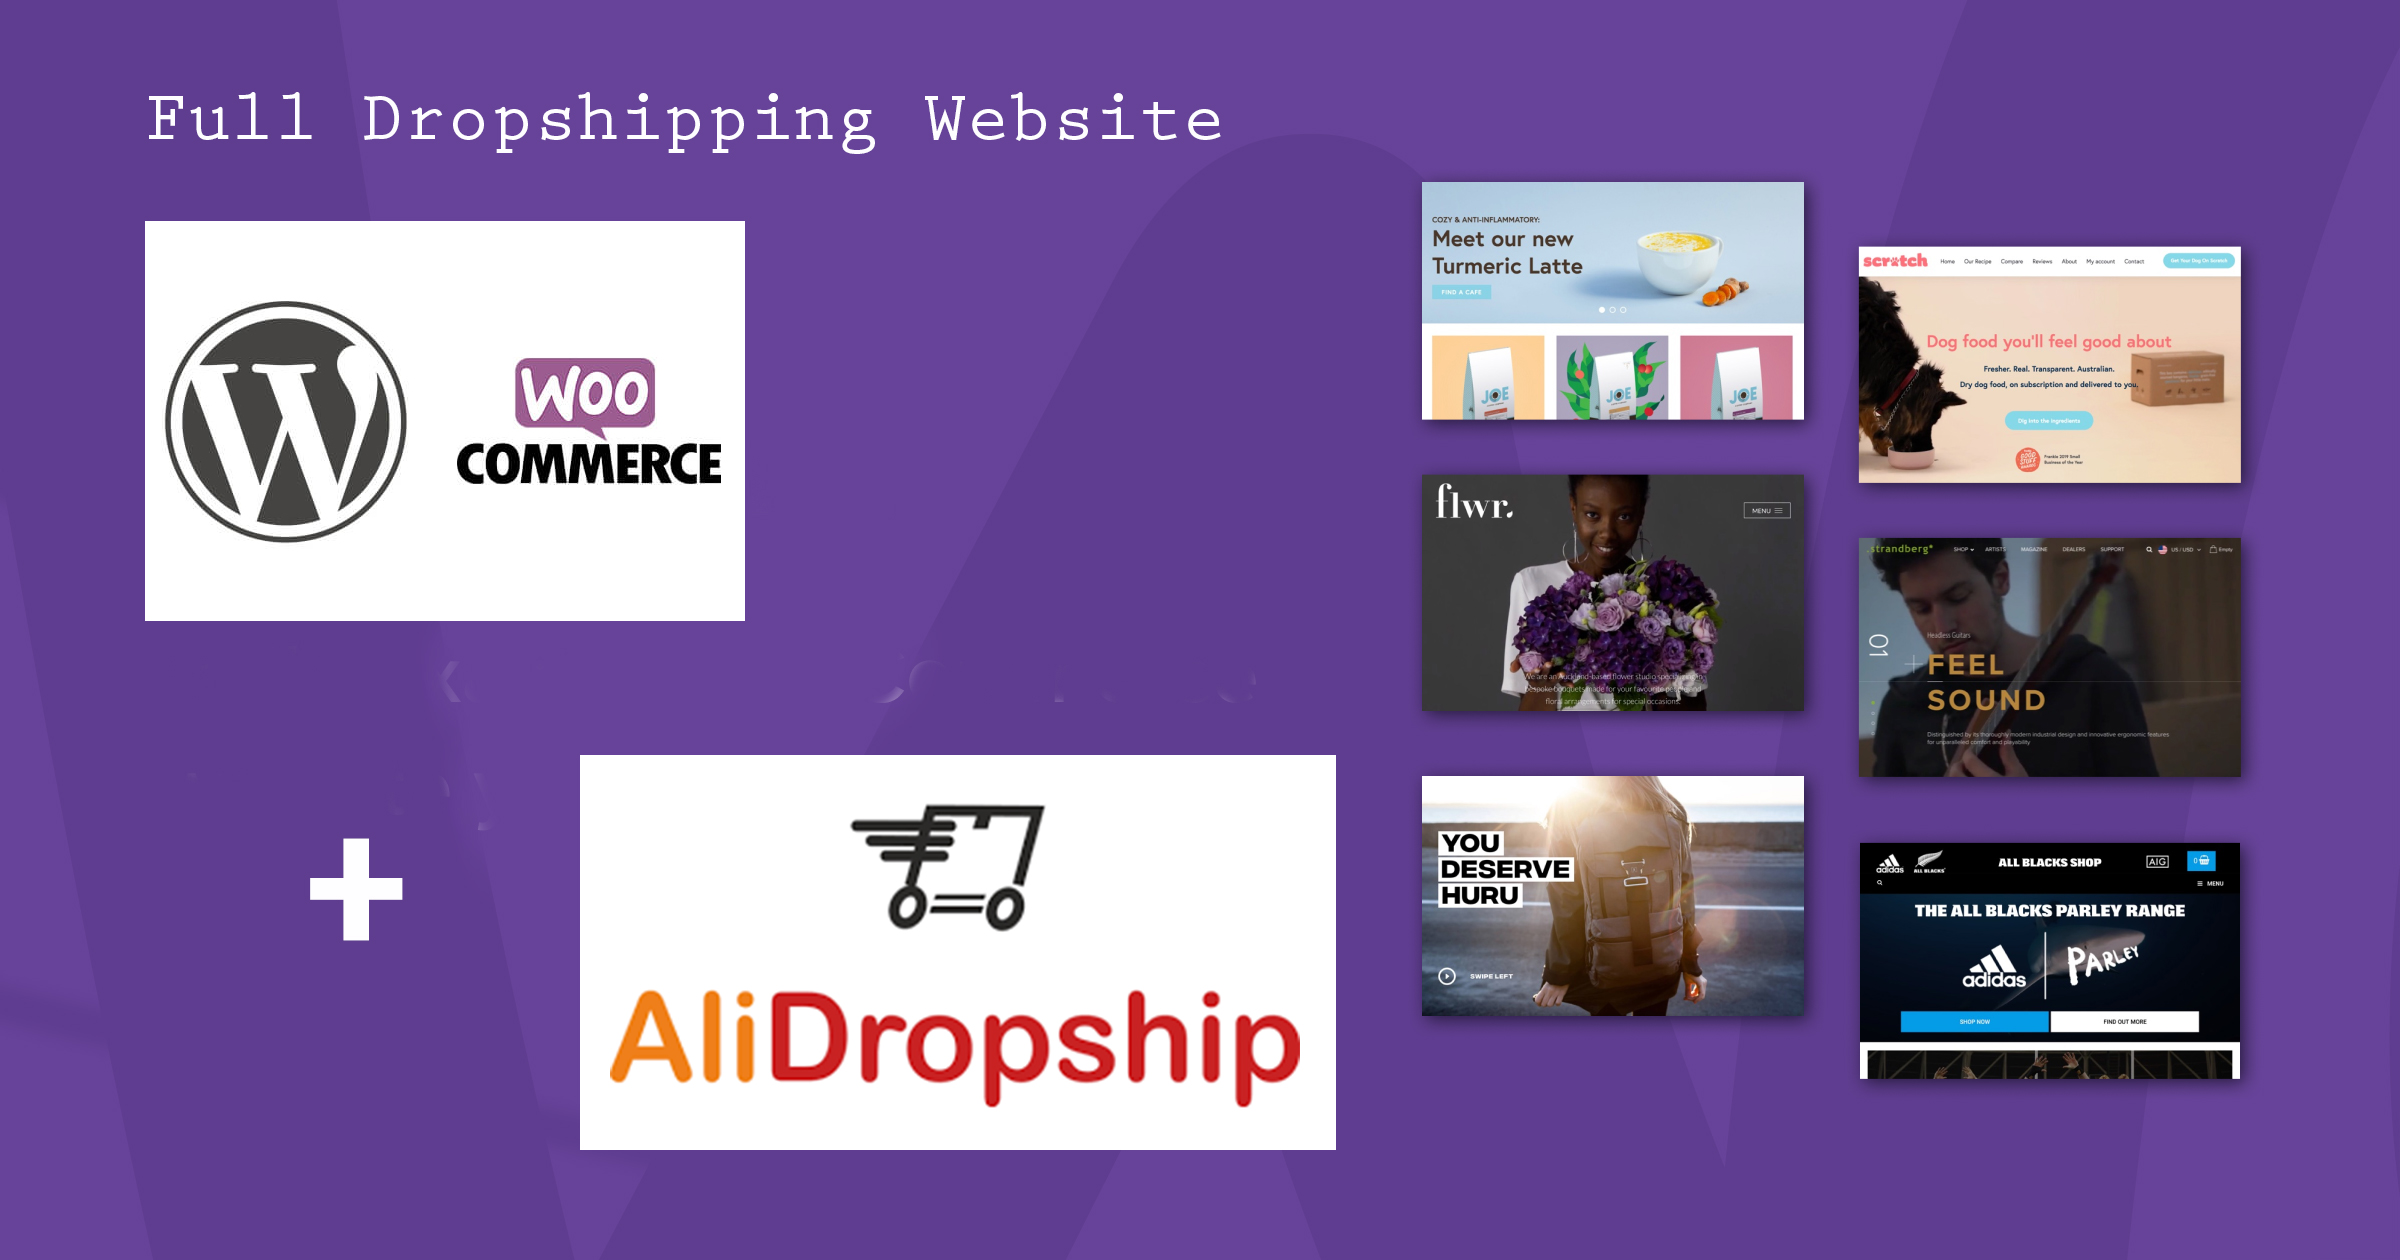 Fully Optimized Dropshipping Website with WordPress, Woocommerce and alidropshipping